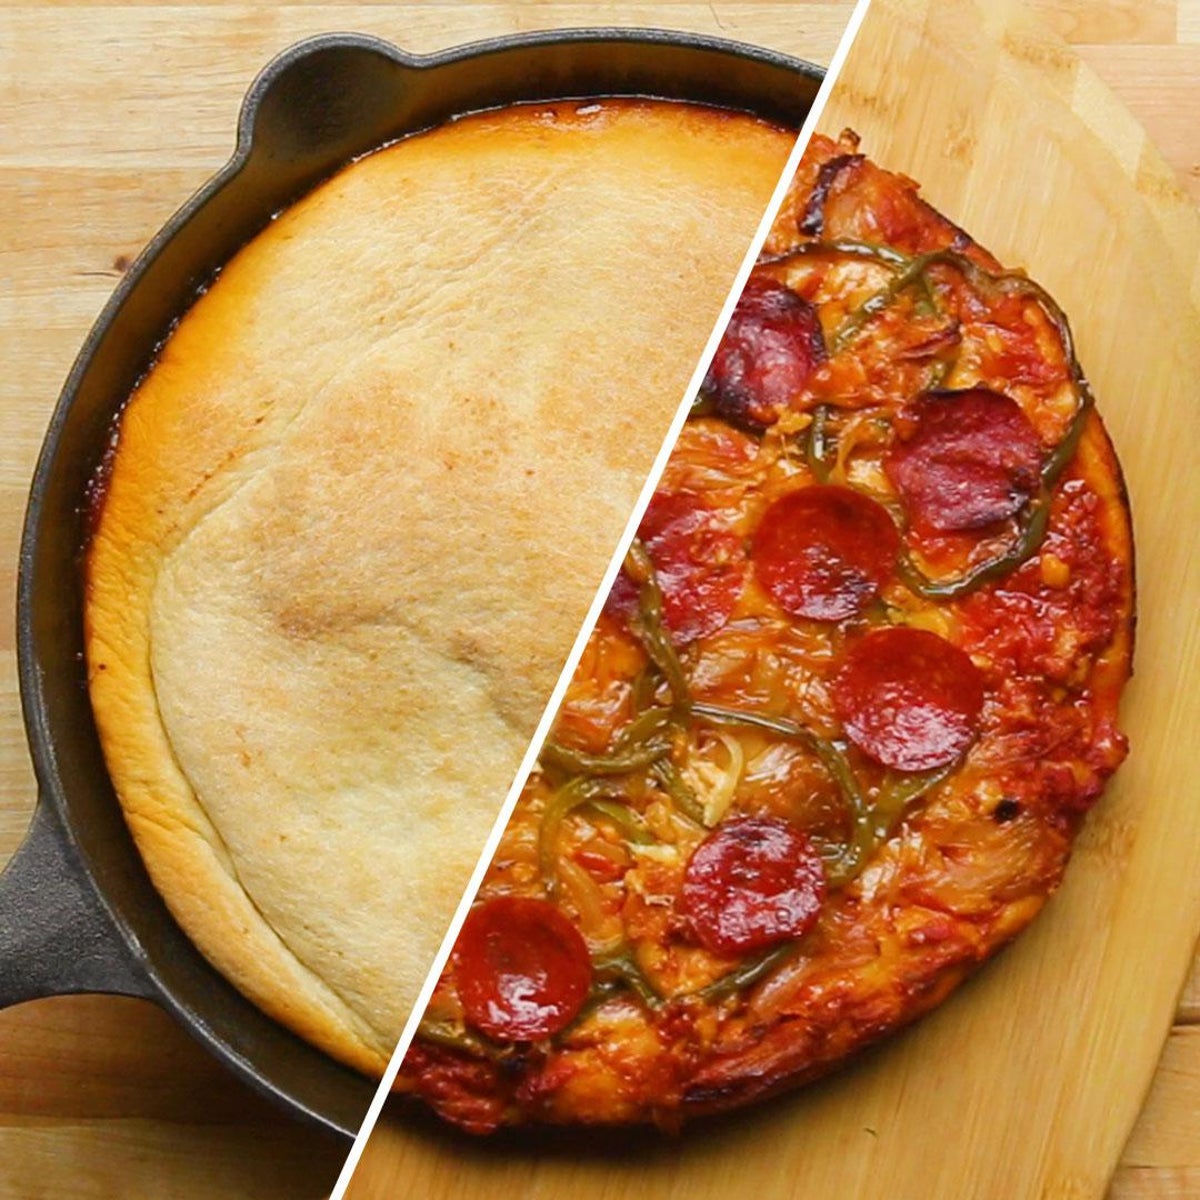 Cast Iron Skillet Pizza Recipe - We are not Martha